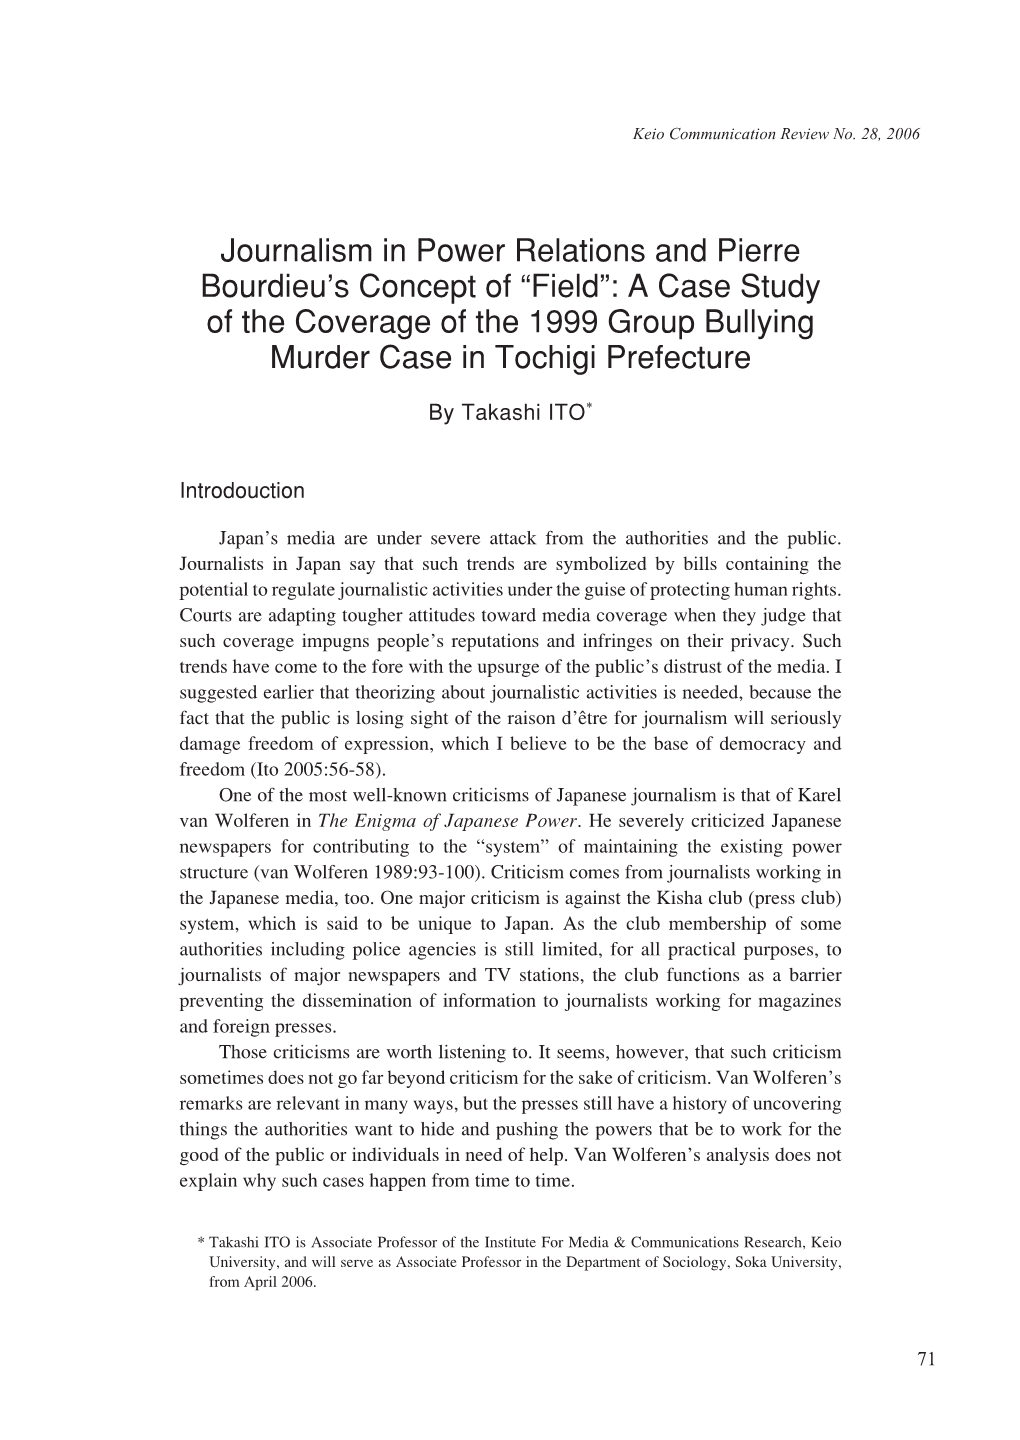 Journalism in Power Relations and Pierre Bourdieu's